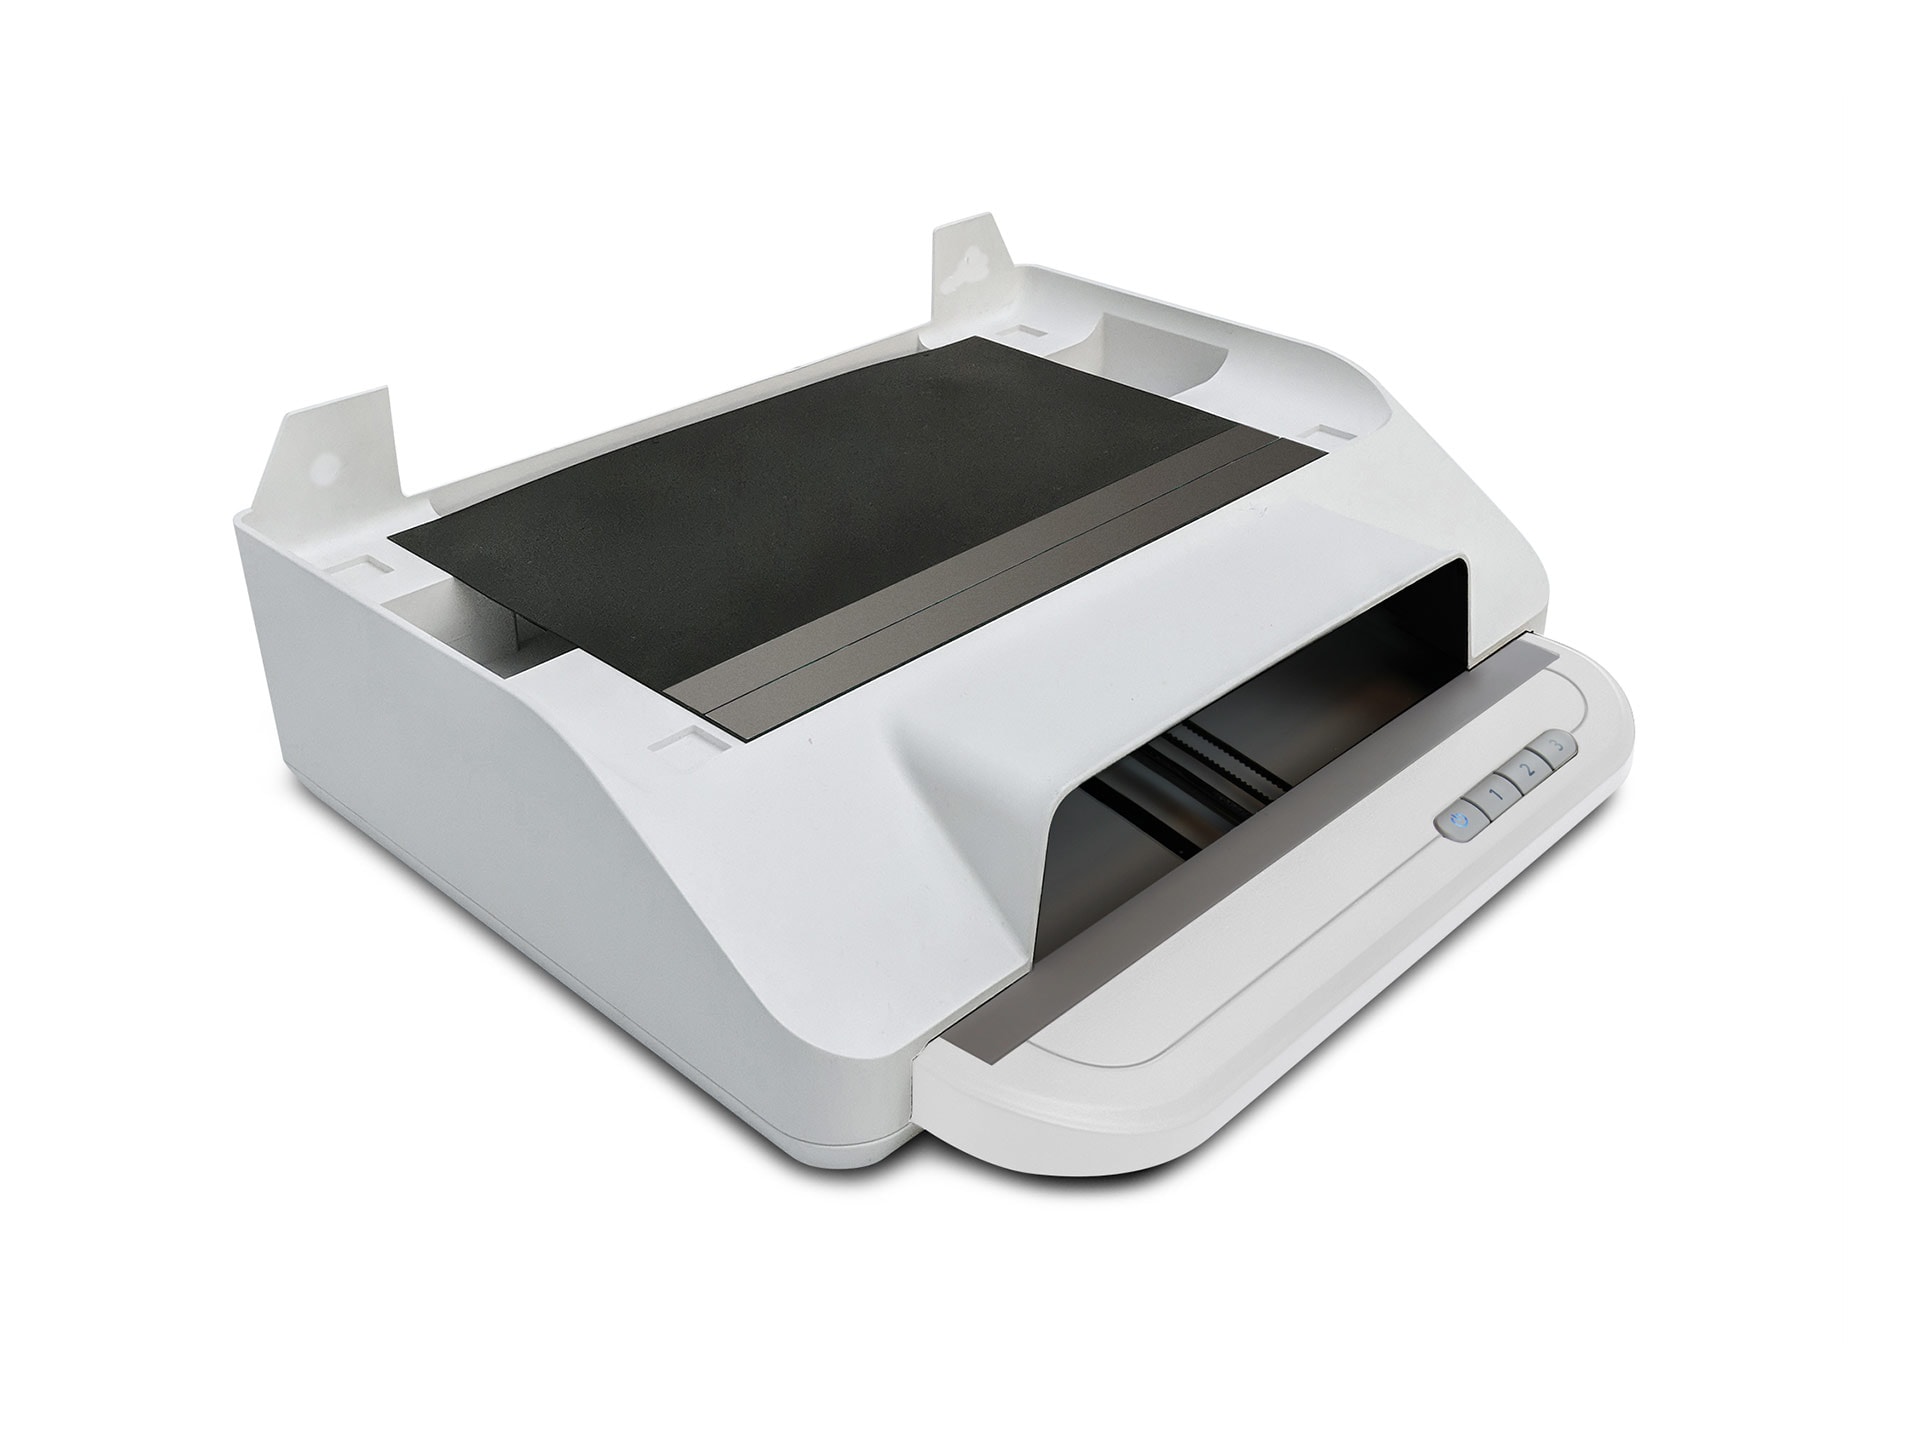 Xerox Passport Scanner Accessory for the DocuMate 6400 Scanner Series